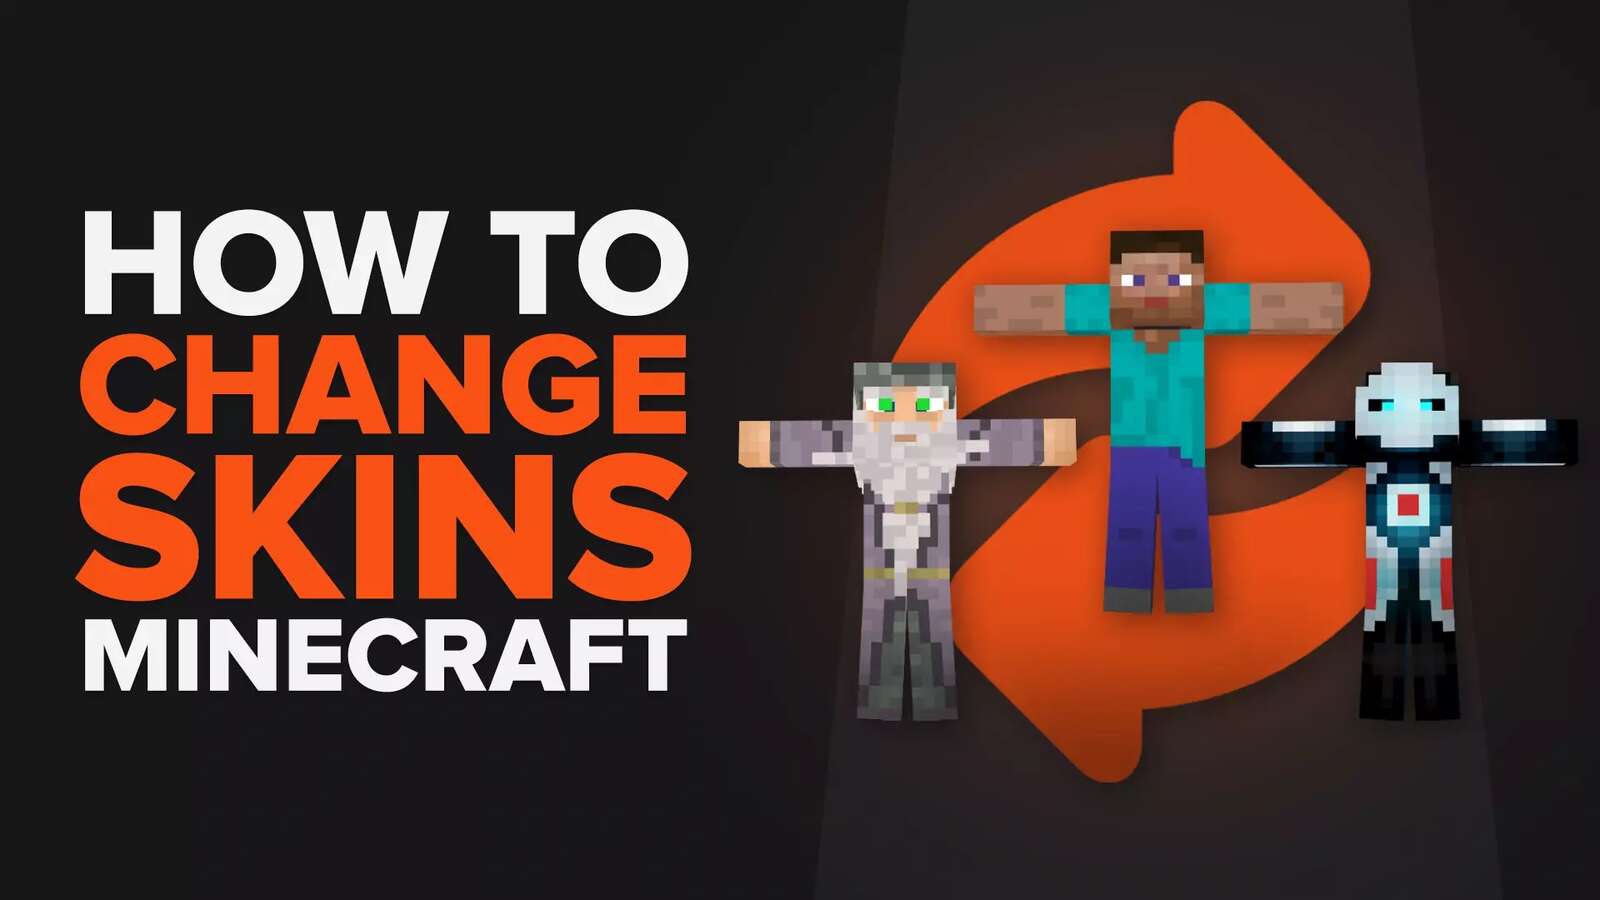 Here's How to Change Skins in Minecraft [Complete Guide]